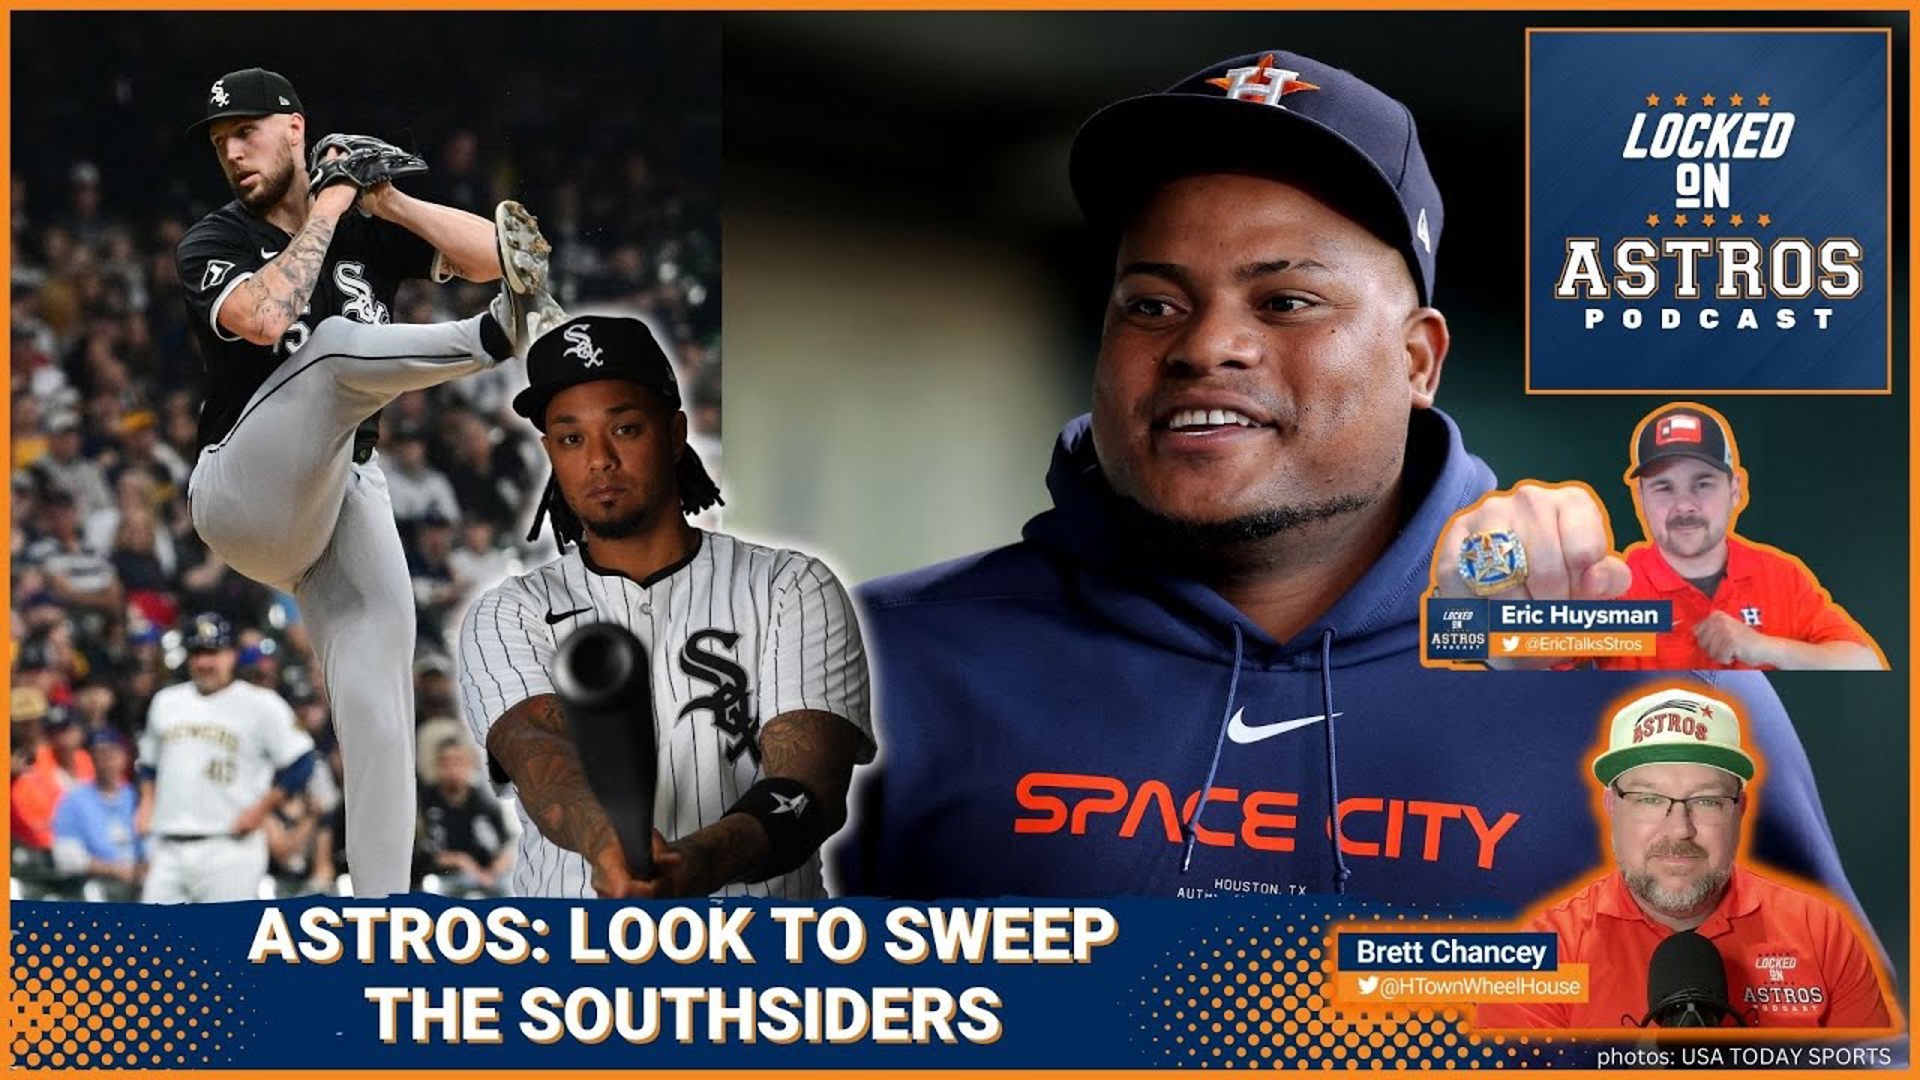 Astros: Look to Sweep the White Sox as they meet up with old friends